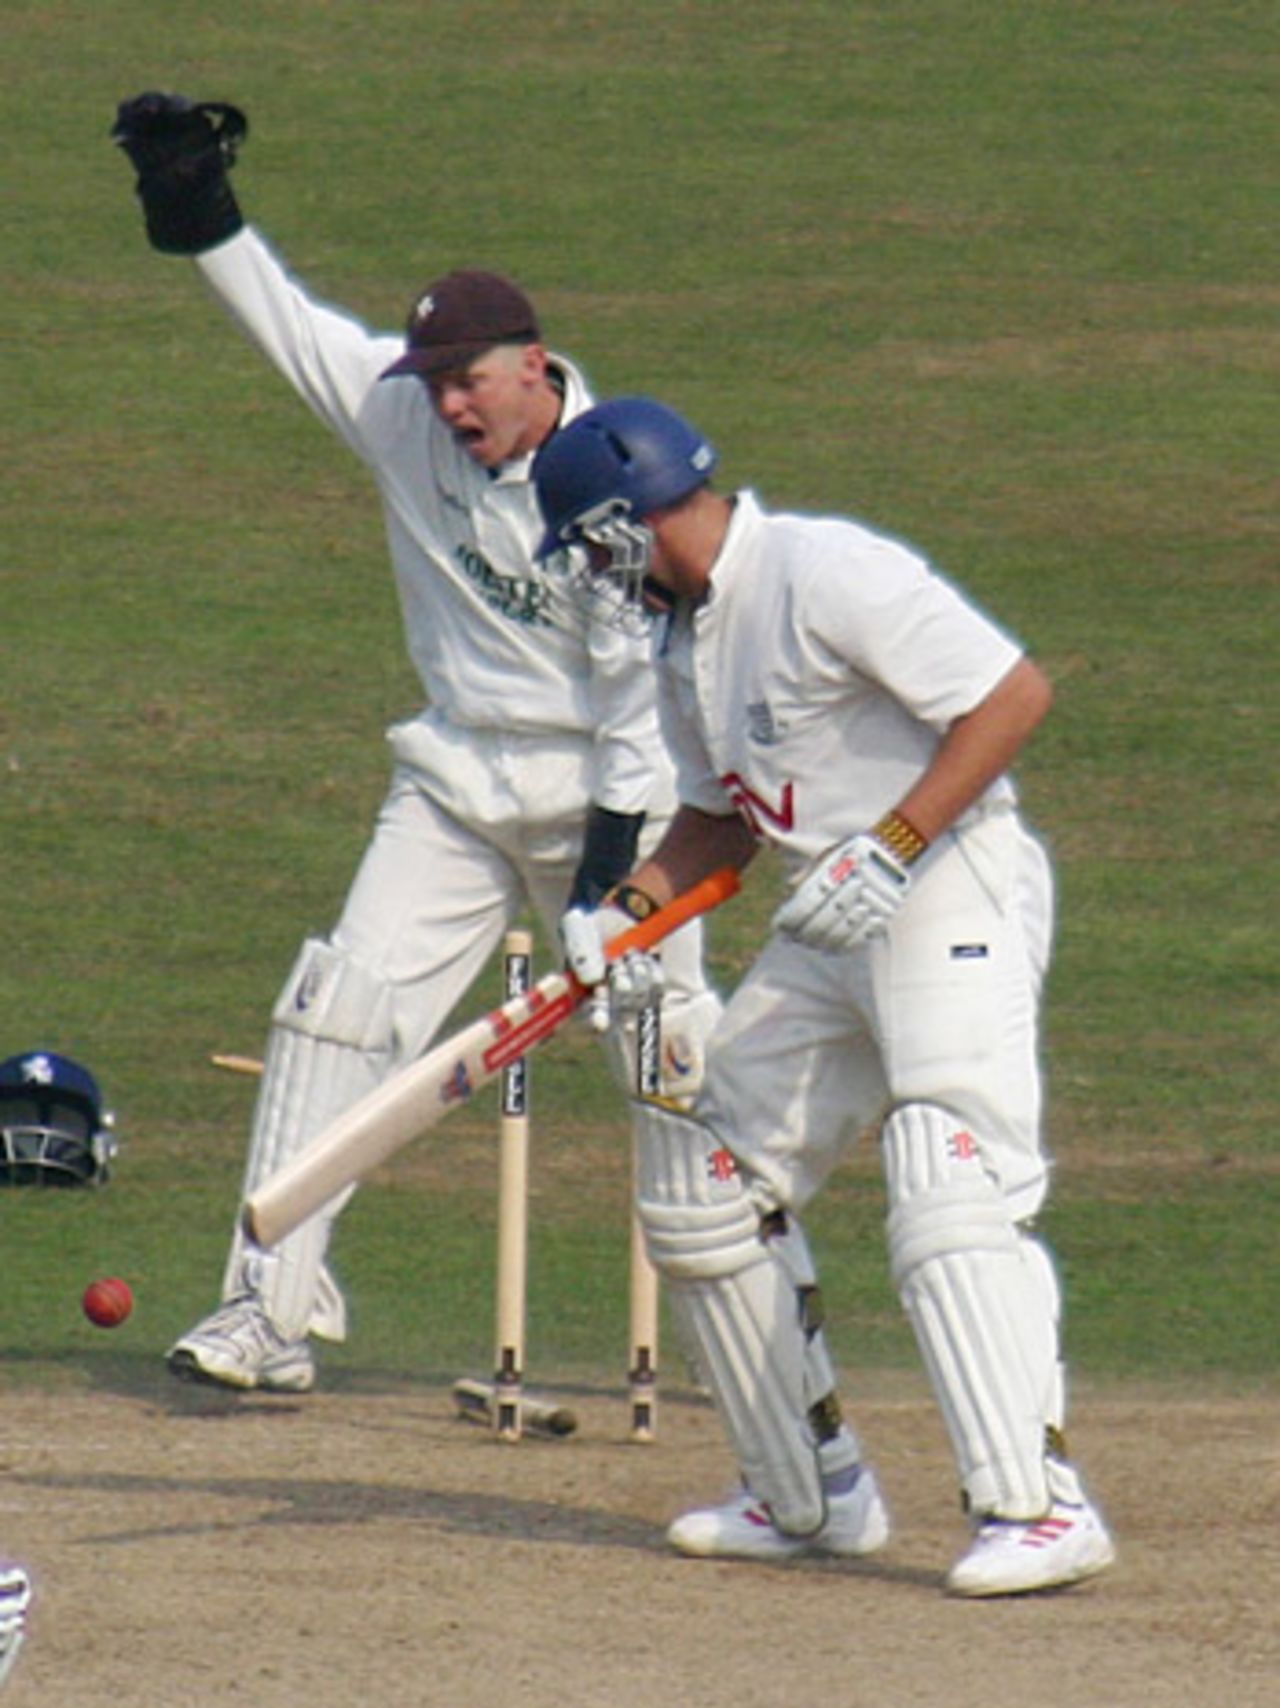 Chris Adams is bowled by Min Patel for 41, Sussex v Kent, Hove, September 22, 2005